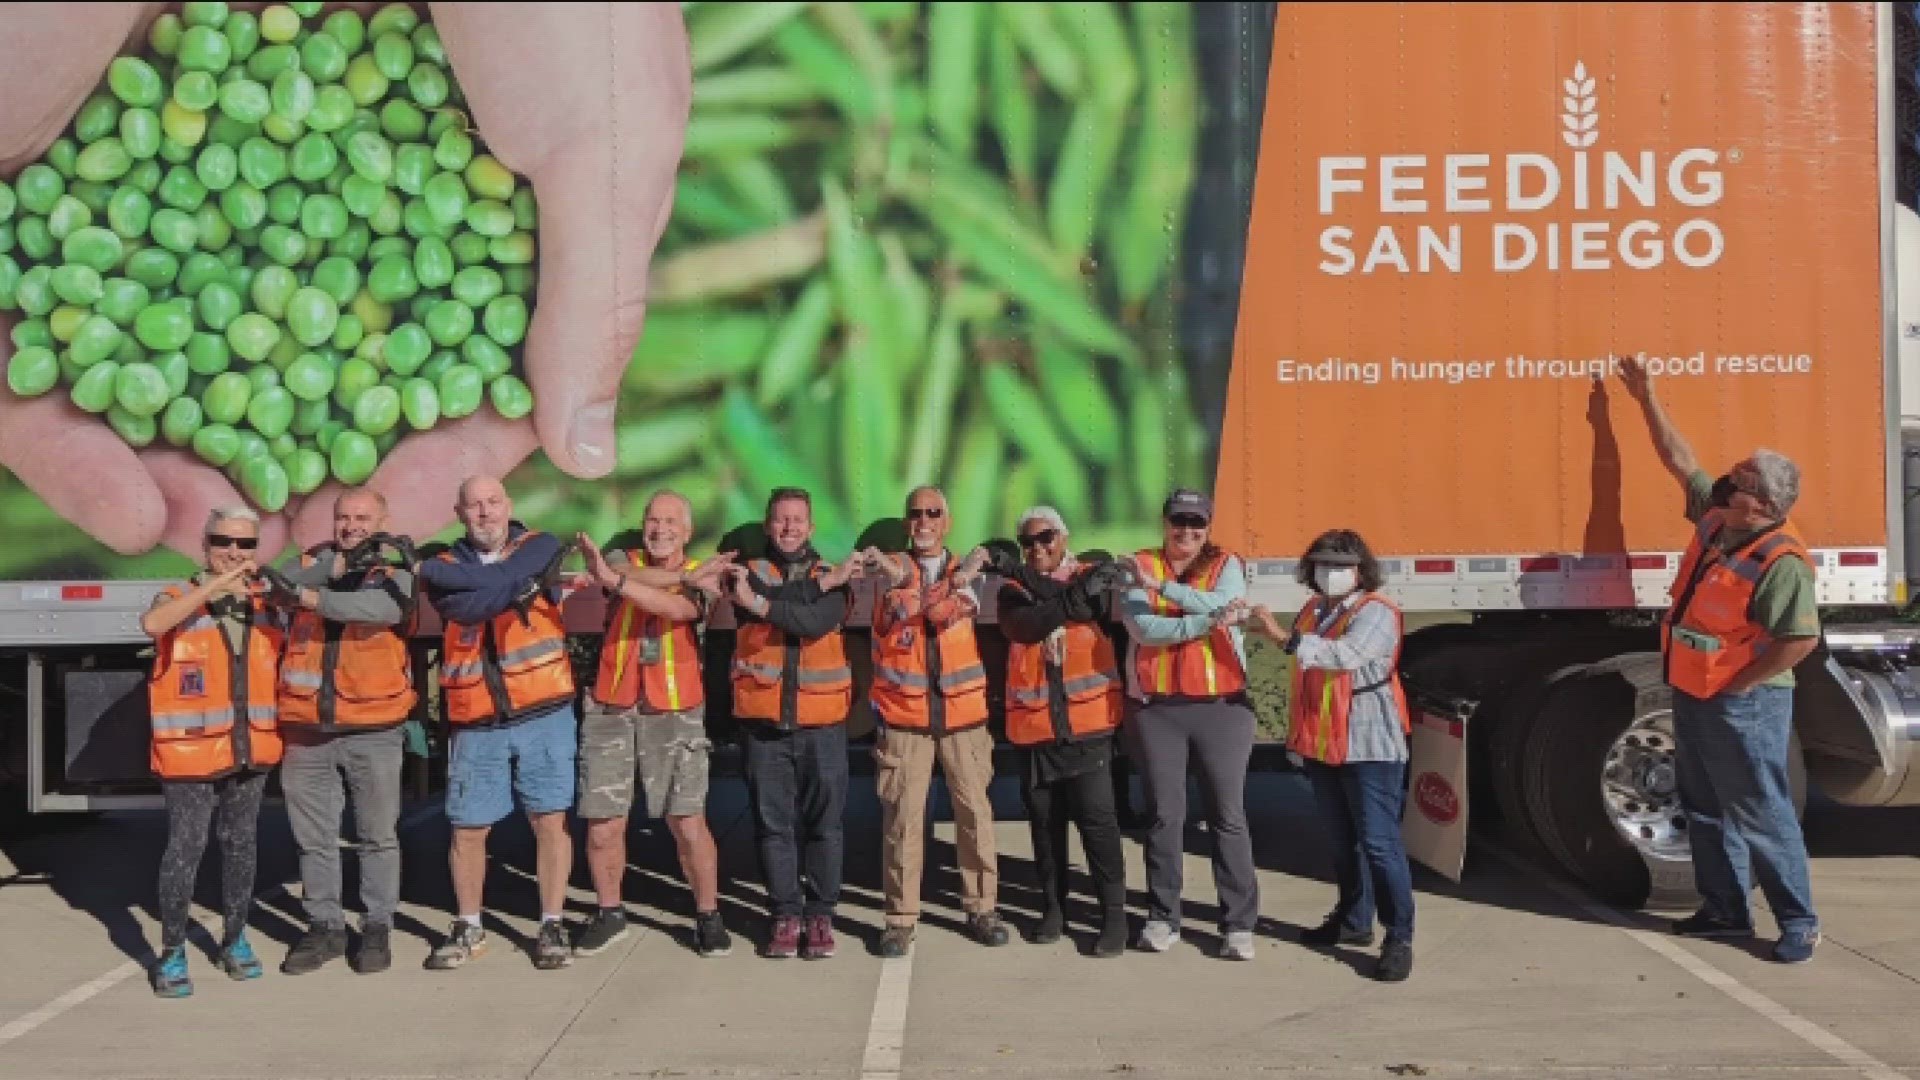 The FOUR is featuring those who are Working for our Community. Feeding San Diego’s Fuel for Summer campaign is bringing hot meals to kids who need it most.